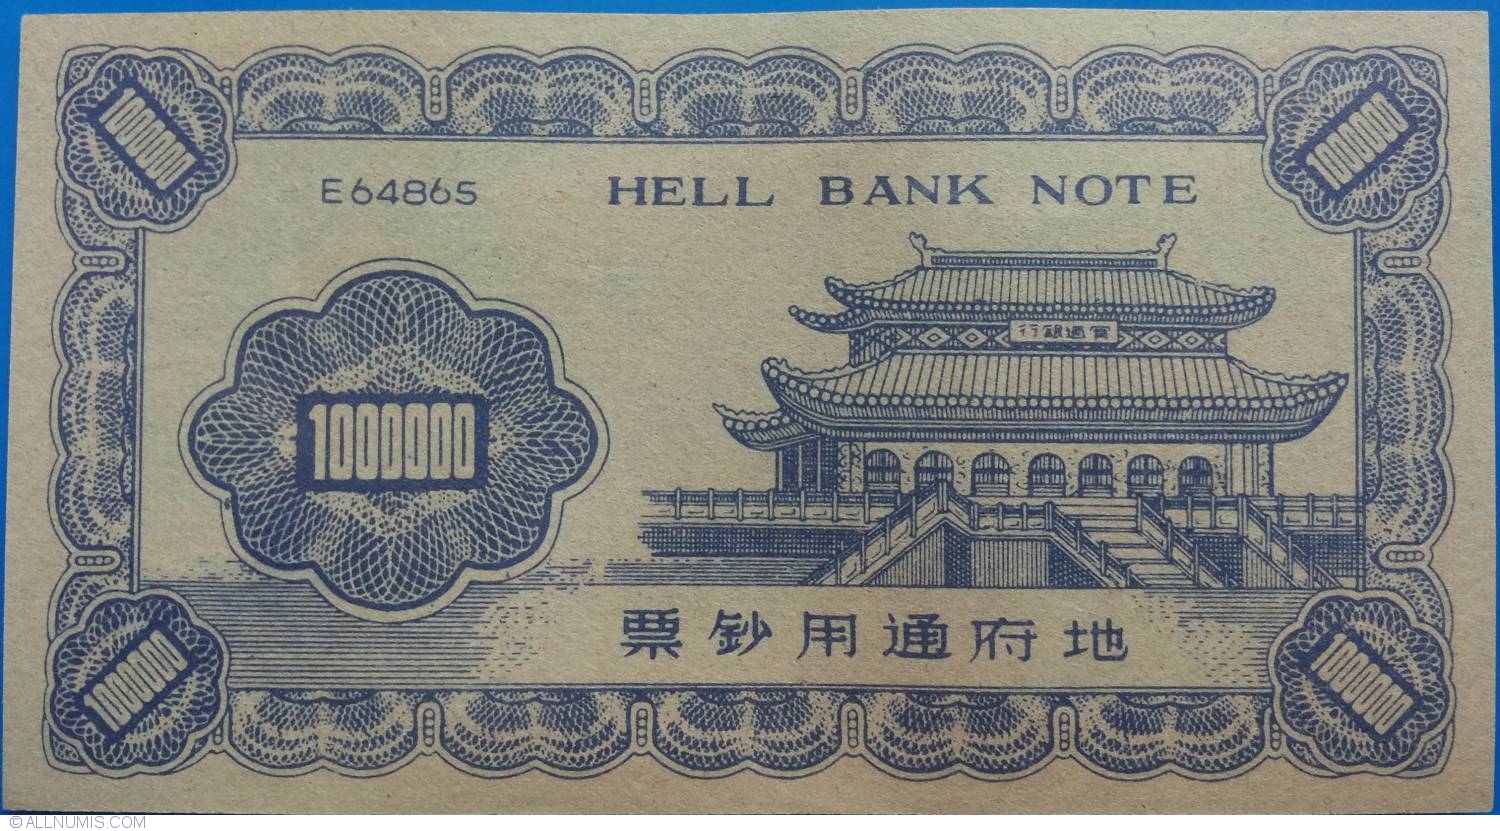 hell bank note 1000000